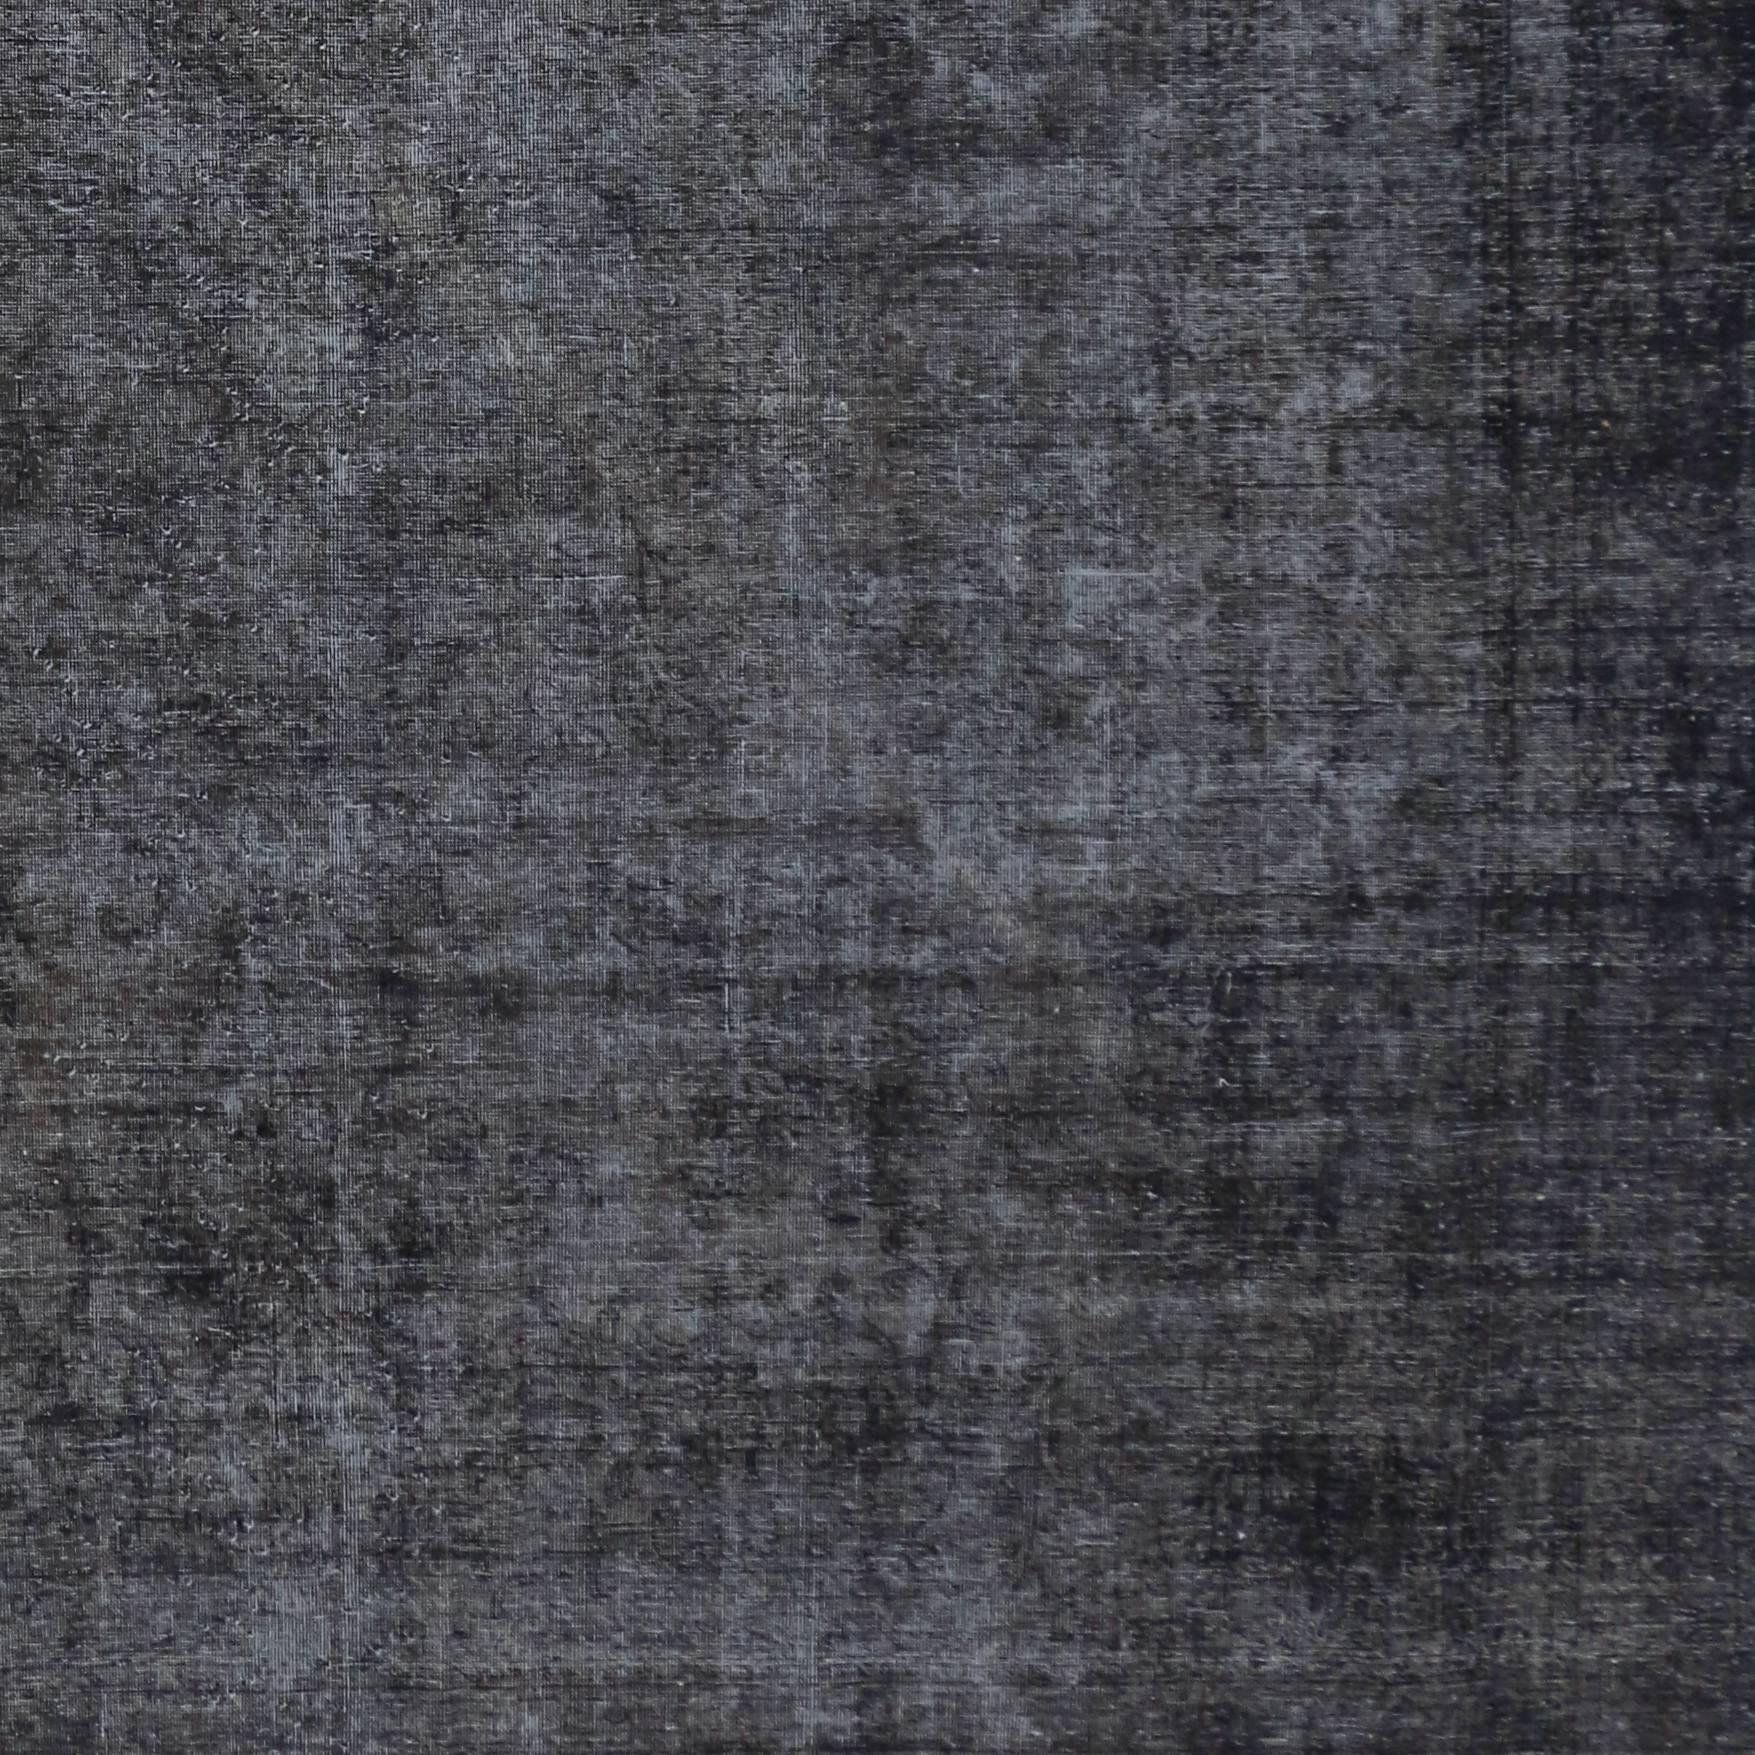 Distressed Antique Persian Charcoal Overdyed Rug with Modern Industrial Style 2